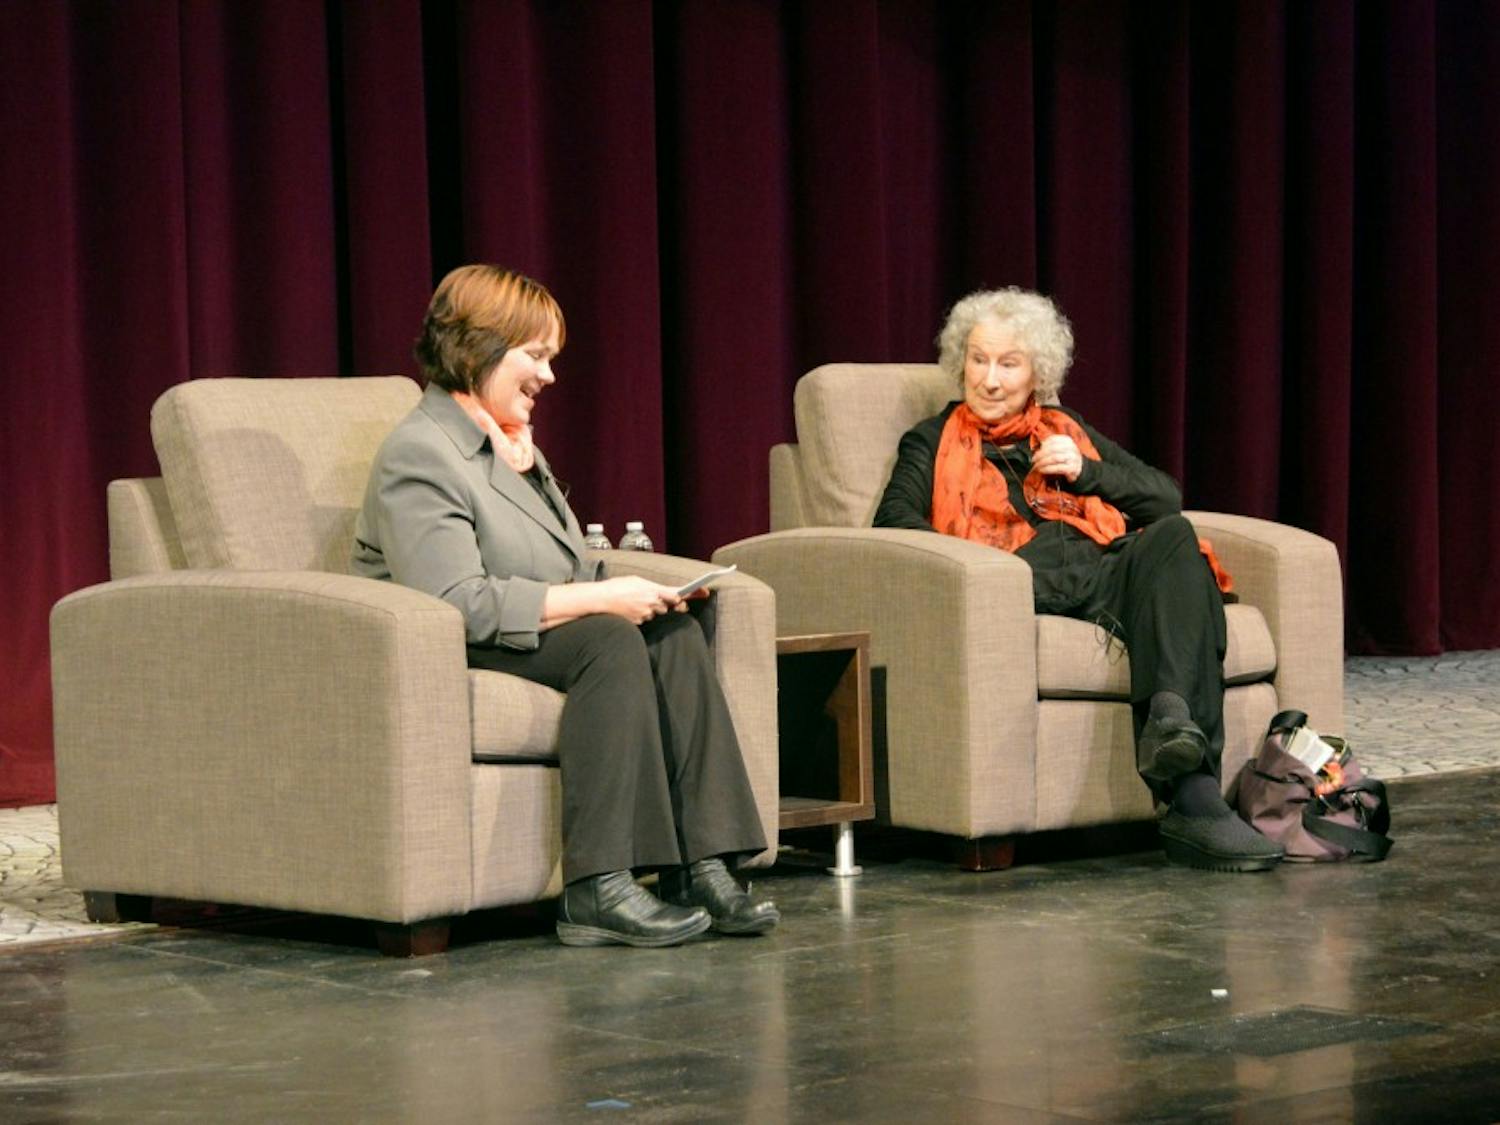 Kari Winter moderating a Q&A with Margaret Atwood on Friday’s Humanities to the Rescue event, “An Evening with Margaret Atwood.